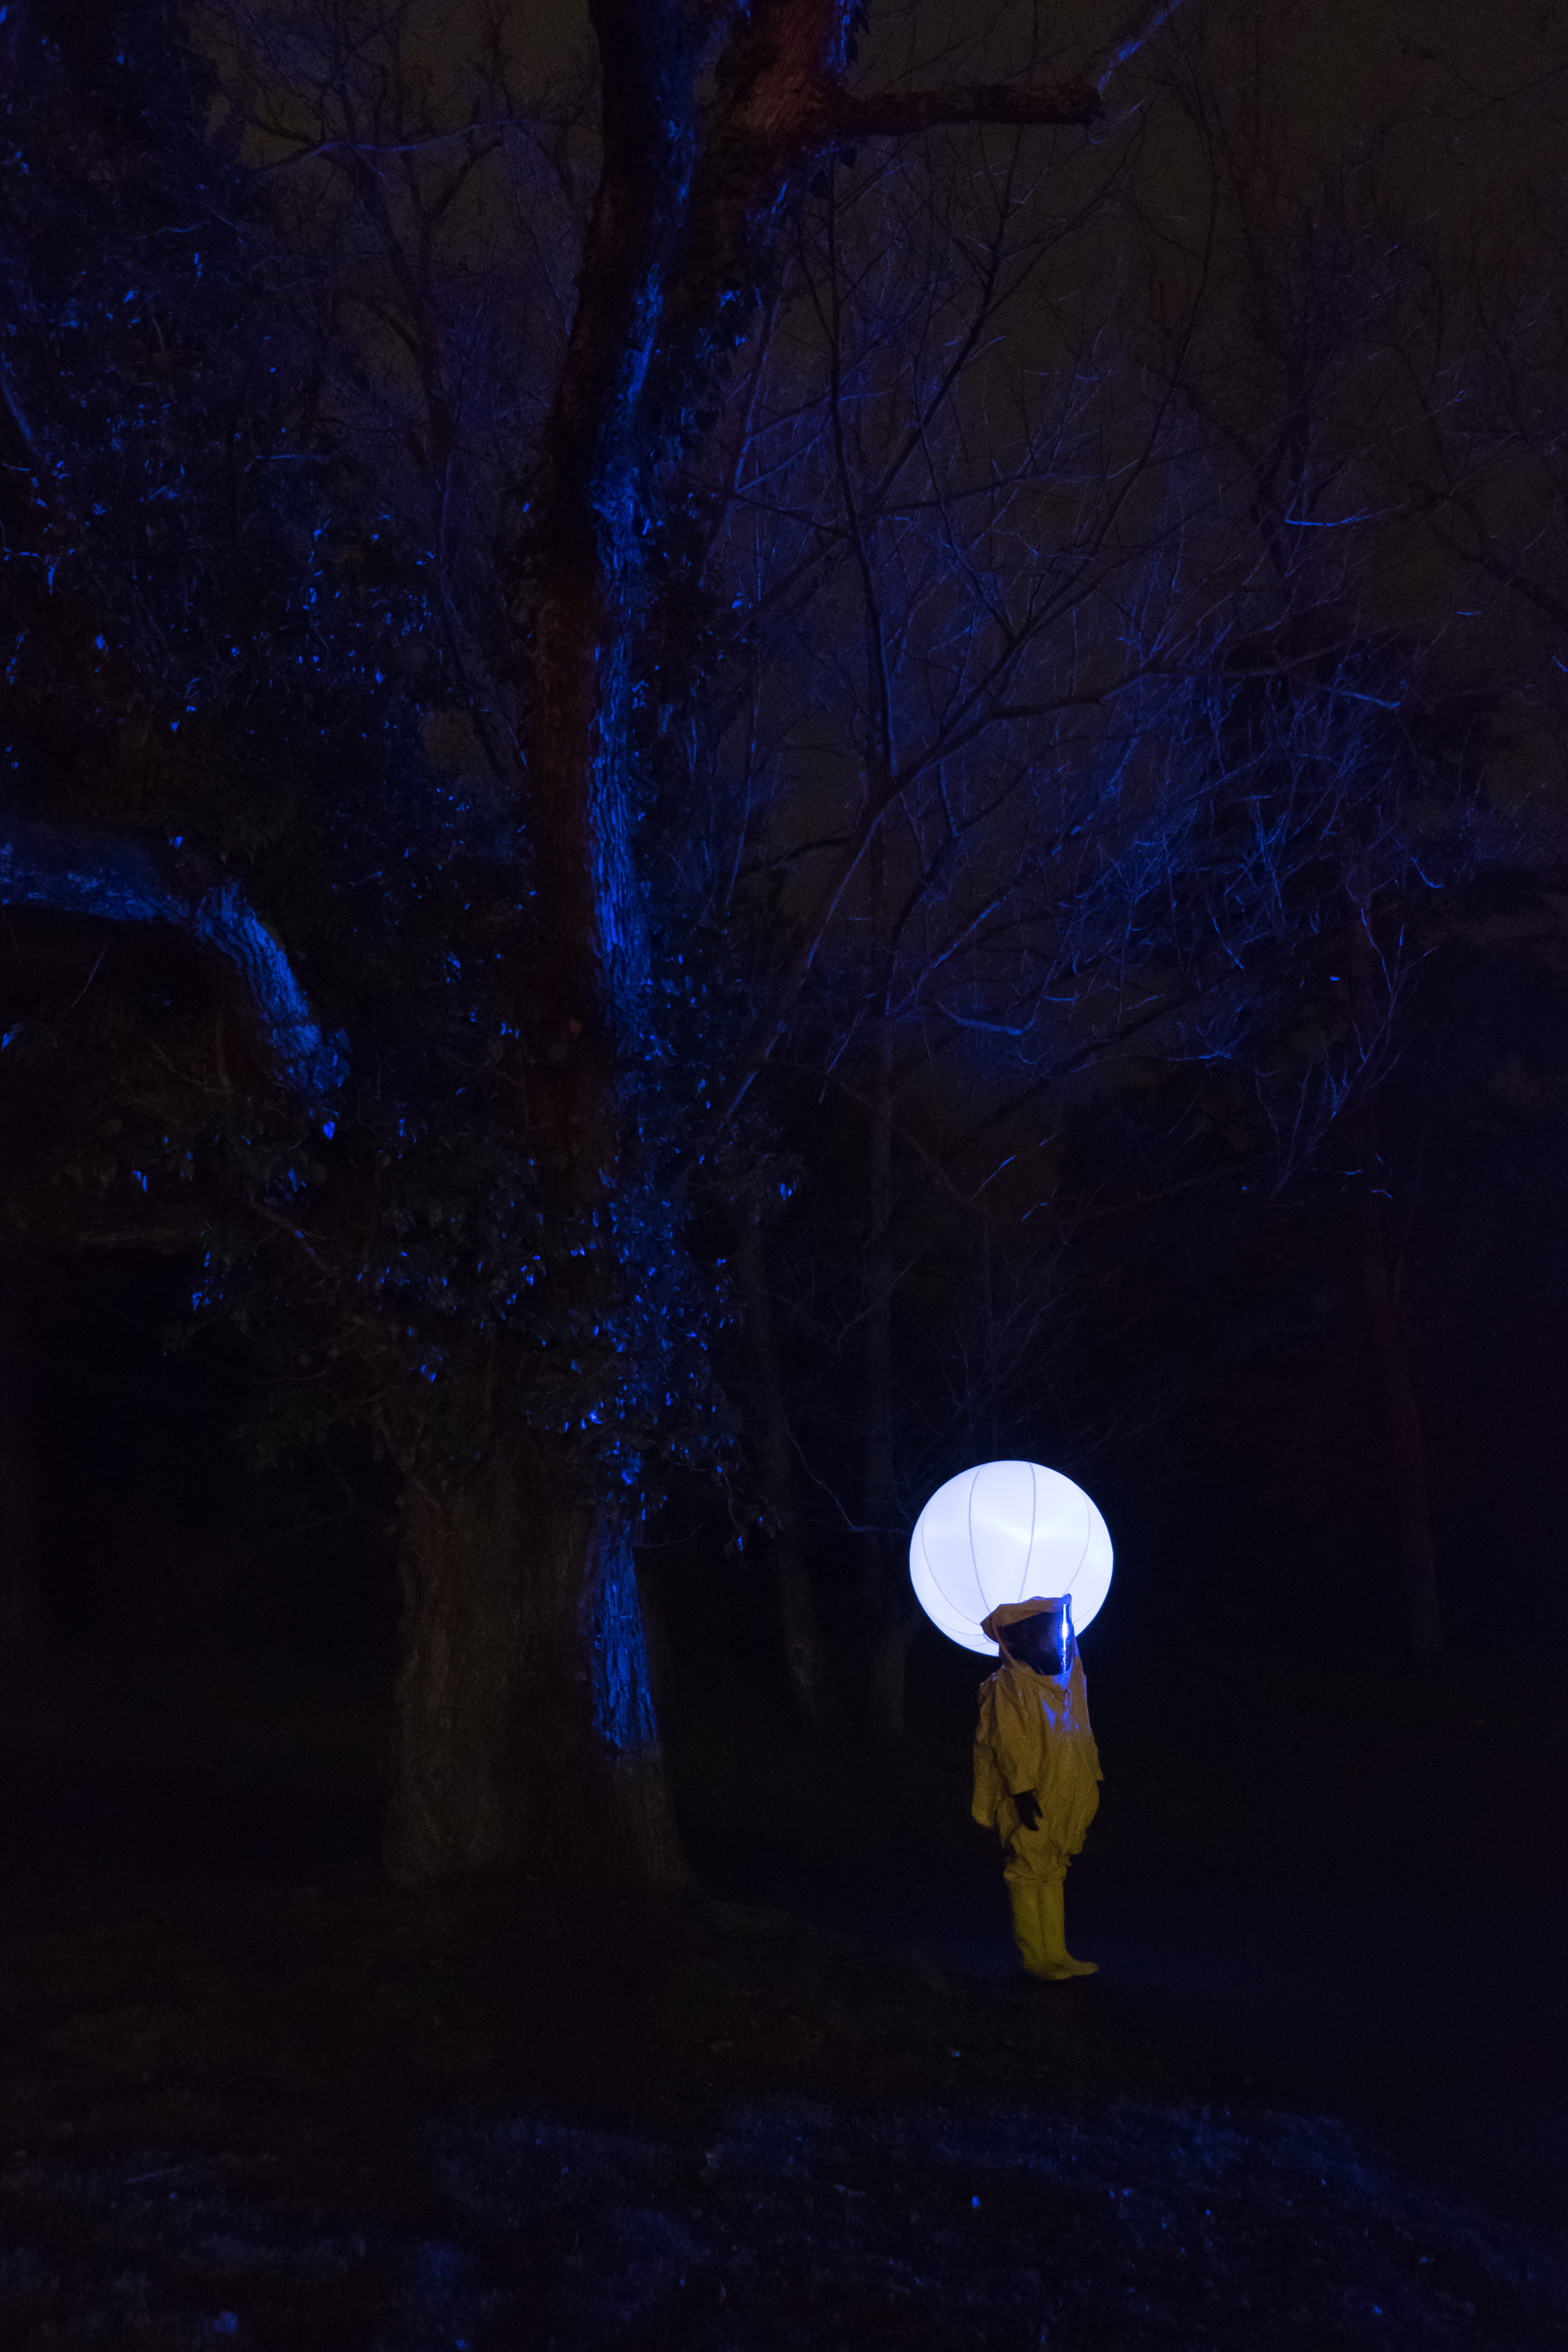 person in white outfit standing under leafless tree at nighttime, person wearing hazmat suit standing near tree